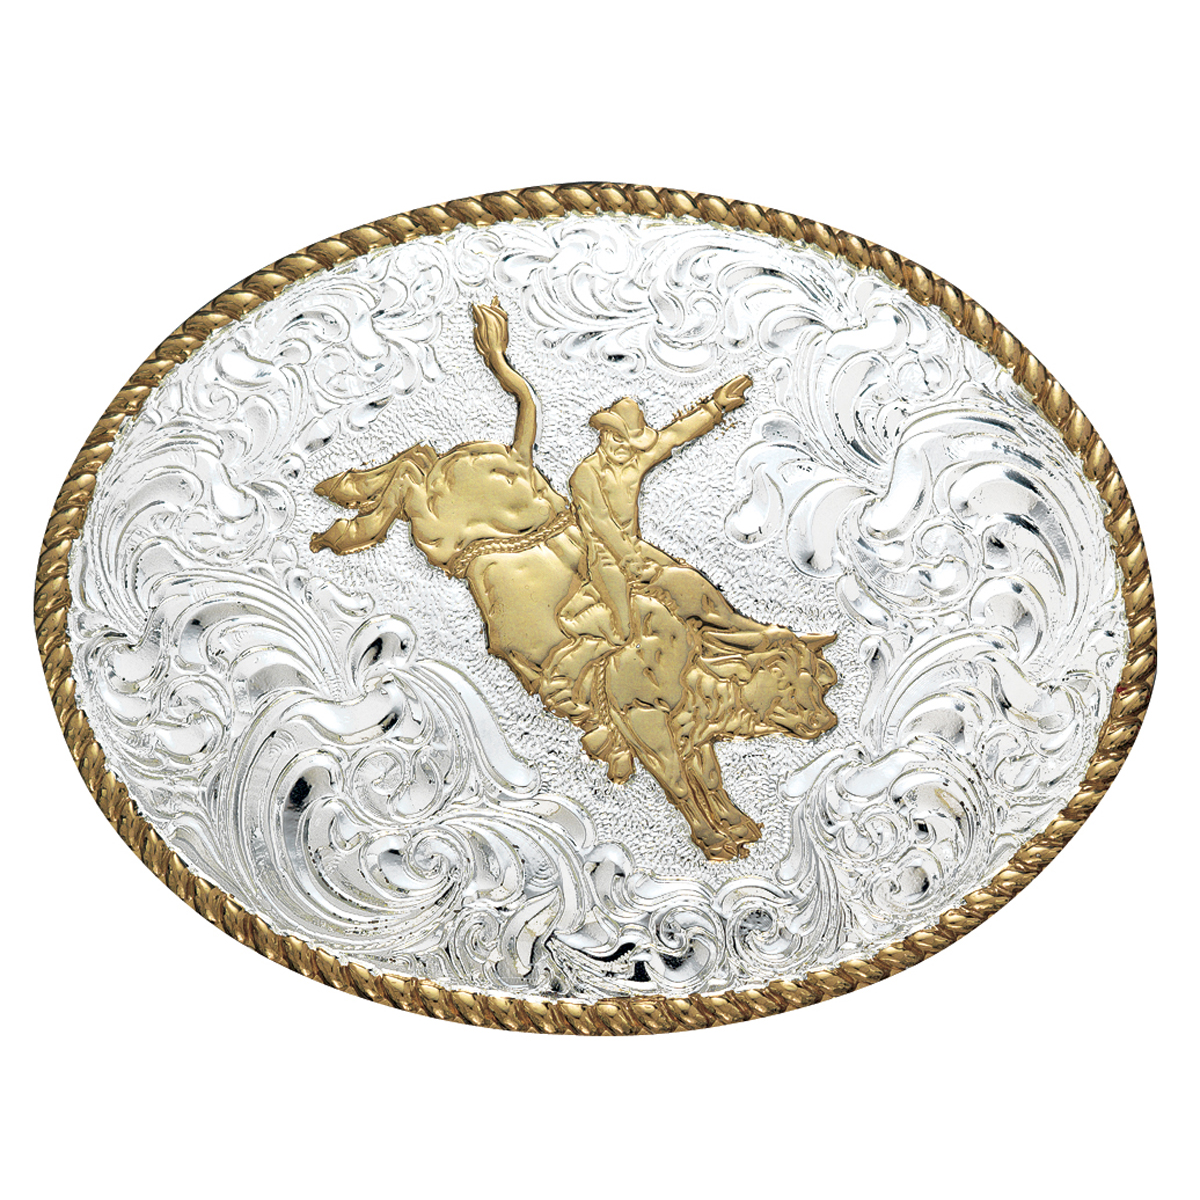 Crumrine Oval Rodeo Buckle - Bull Rider